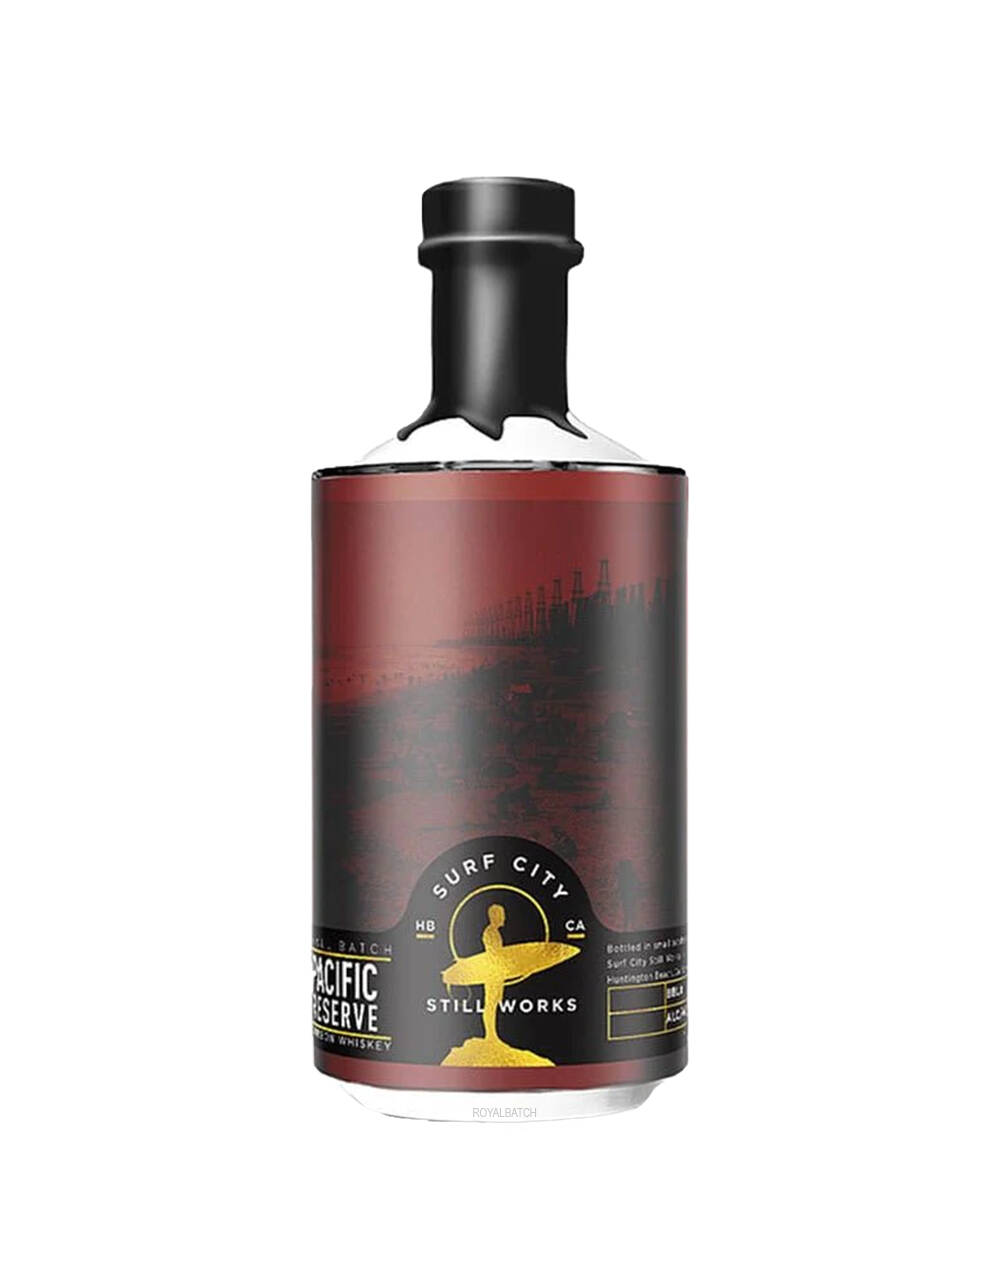 Surf City Still Works Single Barrel Pacific Reserve American Whiskey